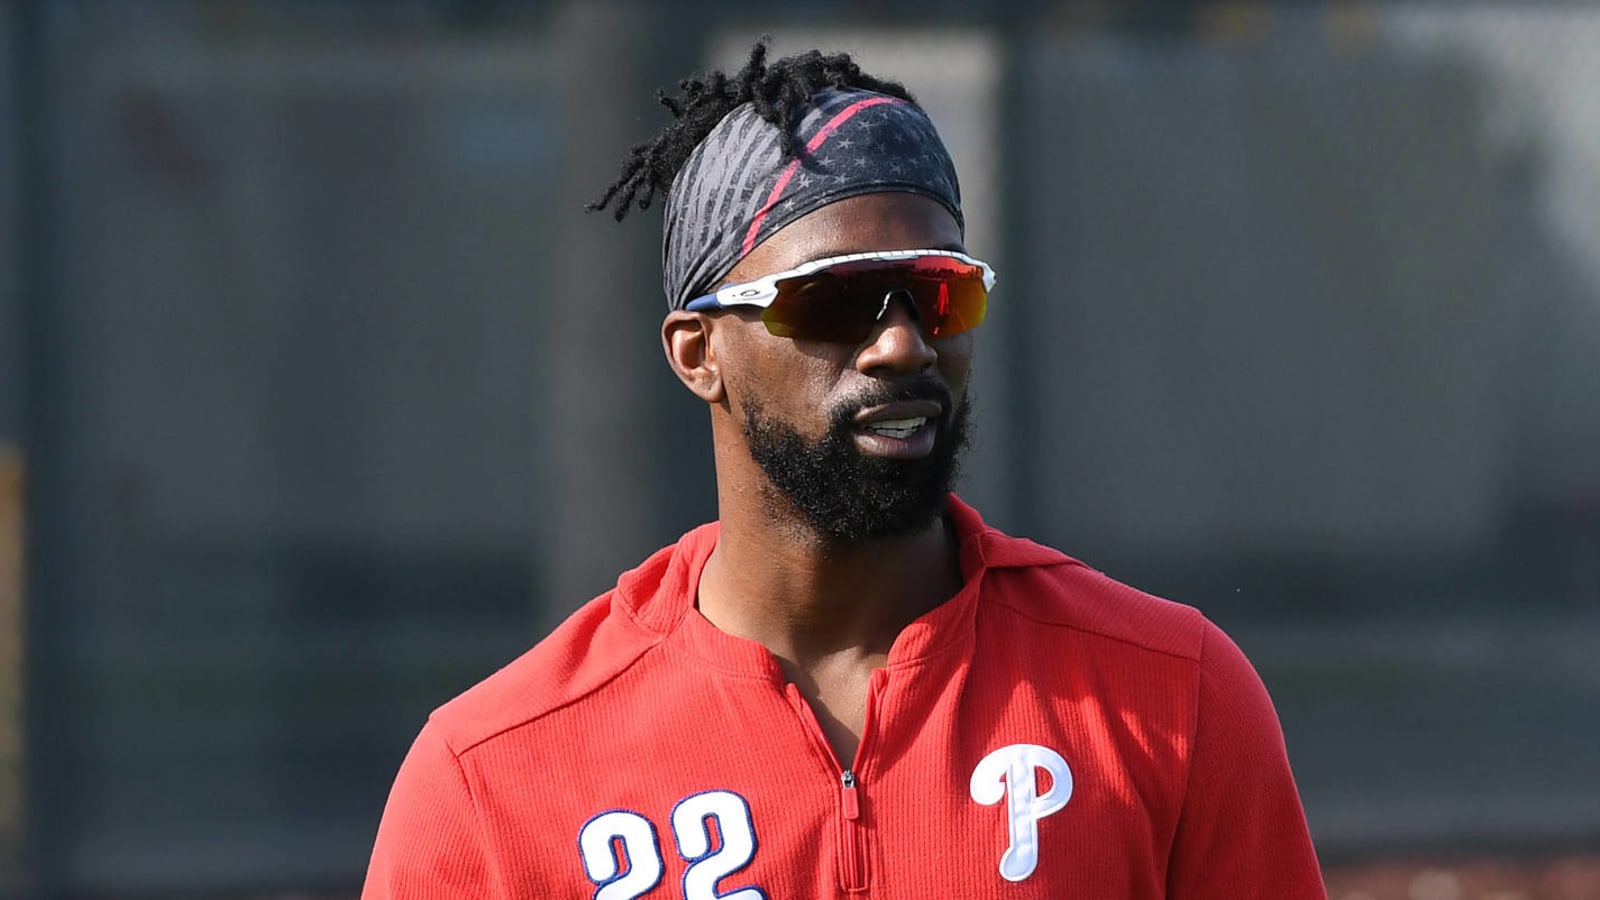 Watch: Andrew McCutchen releases hilarious video explaining MLB’s offers for 2020 season